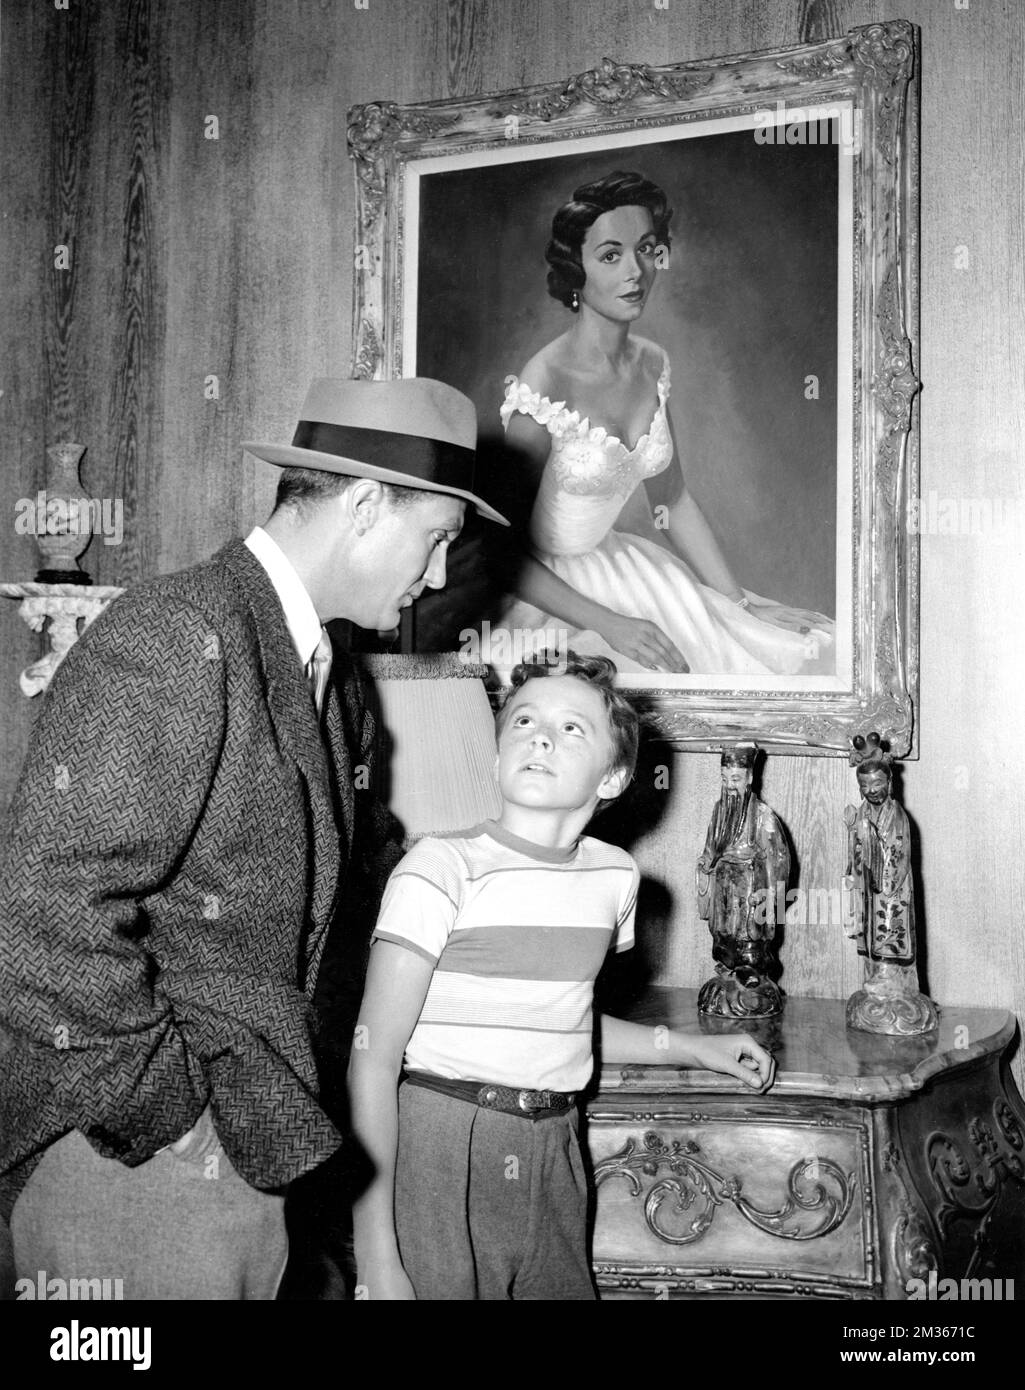 ROBERT STACK as Mark McPherson and JOHNNY WASHBROOK next to painting of DANA WYNTER as Laura Hunt in the one hour mini-feature remake of LAURA / aka A PORTRAIT OF MURDER 1955 director JOHN BRAHM novel Vera Caspary adapted by Mel Dinelli produced by Otto Lang for the 20th Century-Fox Hour US TV Series (1955-57) aired on TV on October 19th 1955 and released in other territories as a cinema featurette publicity for Twentieth Century Fox Stock Photo